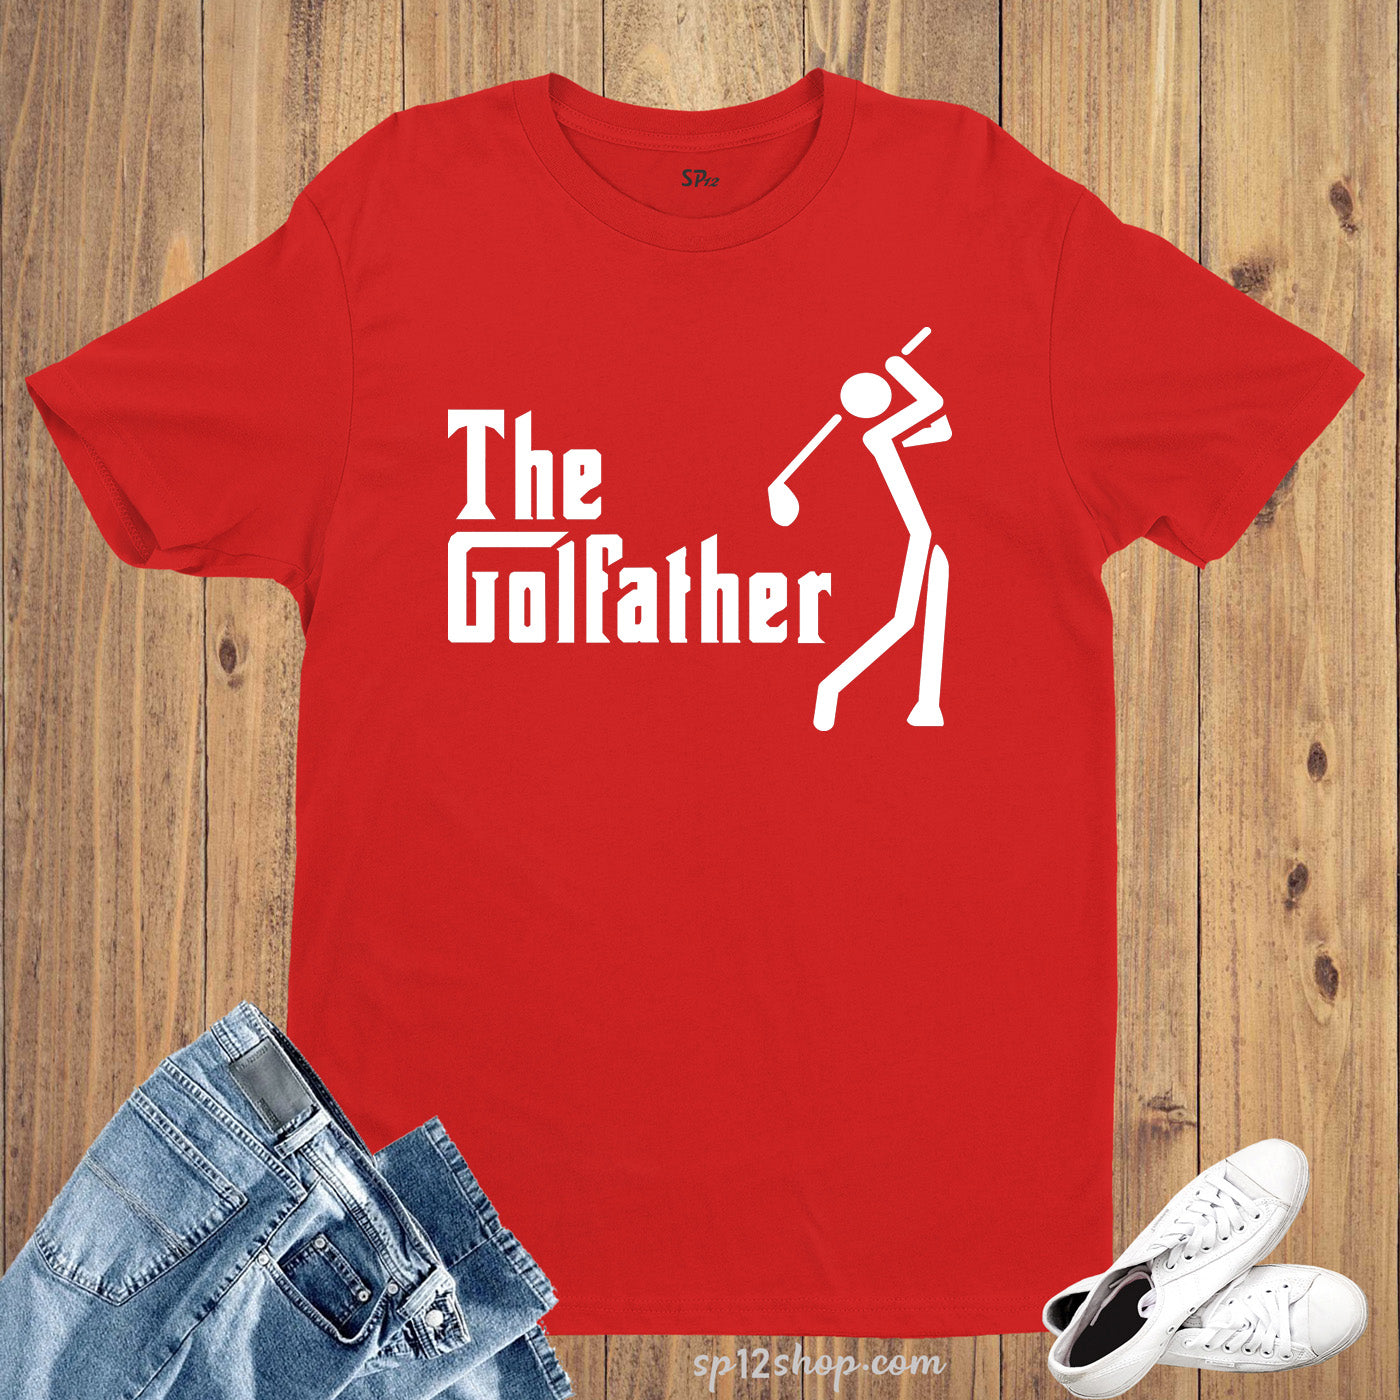 Sports Team Daddy T Shirt  The Golfather